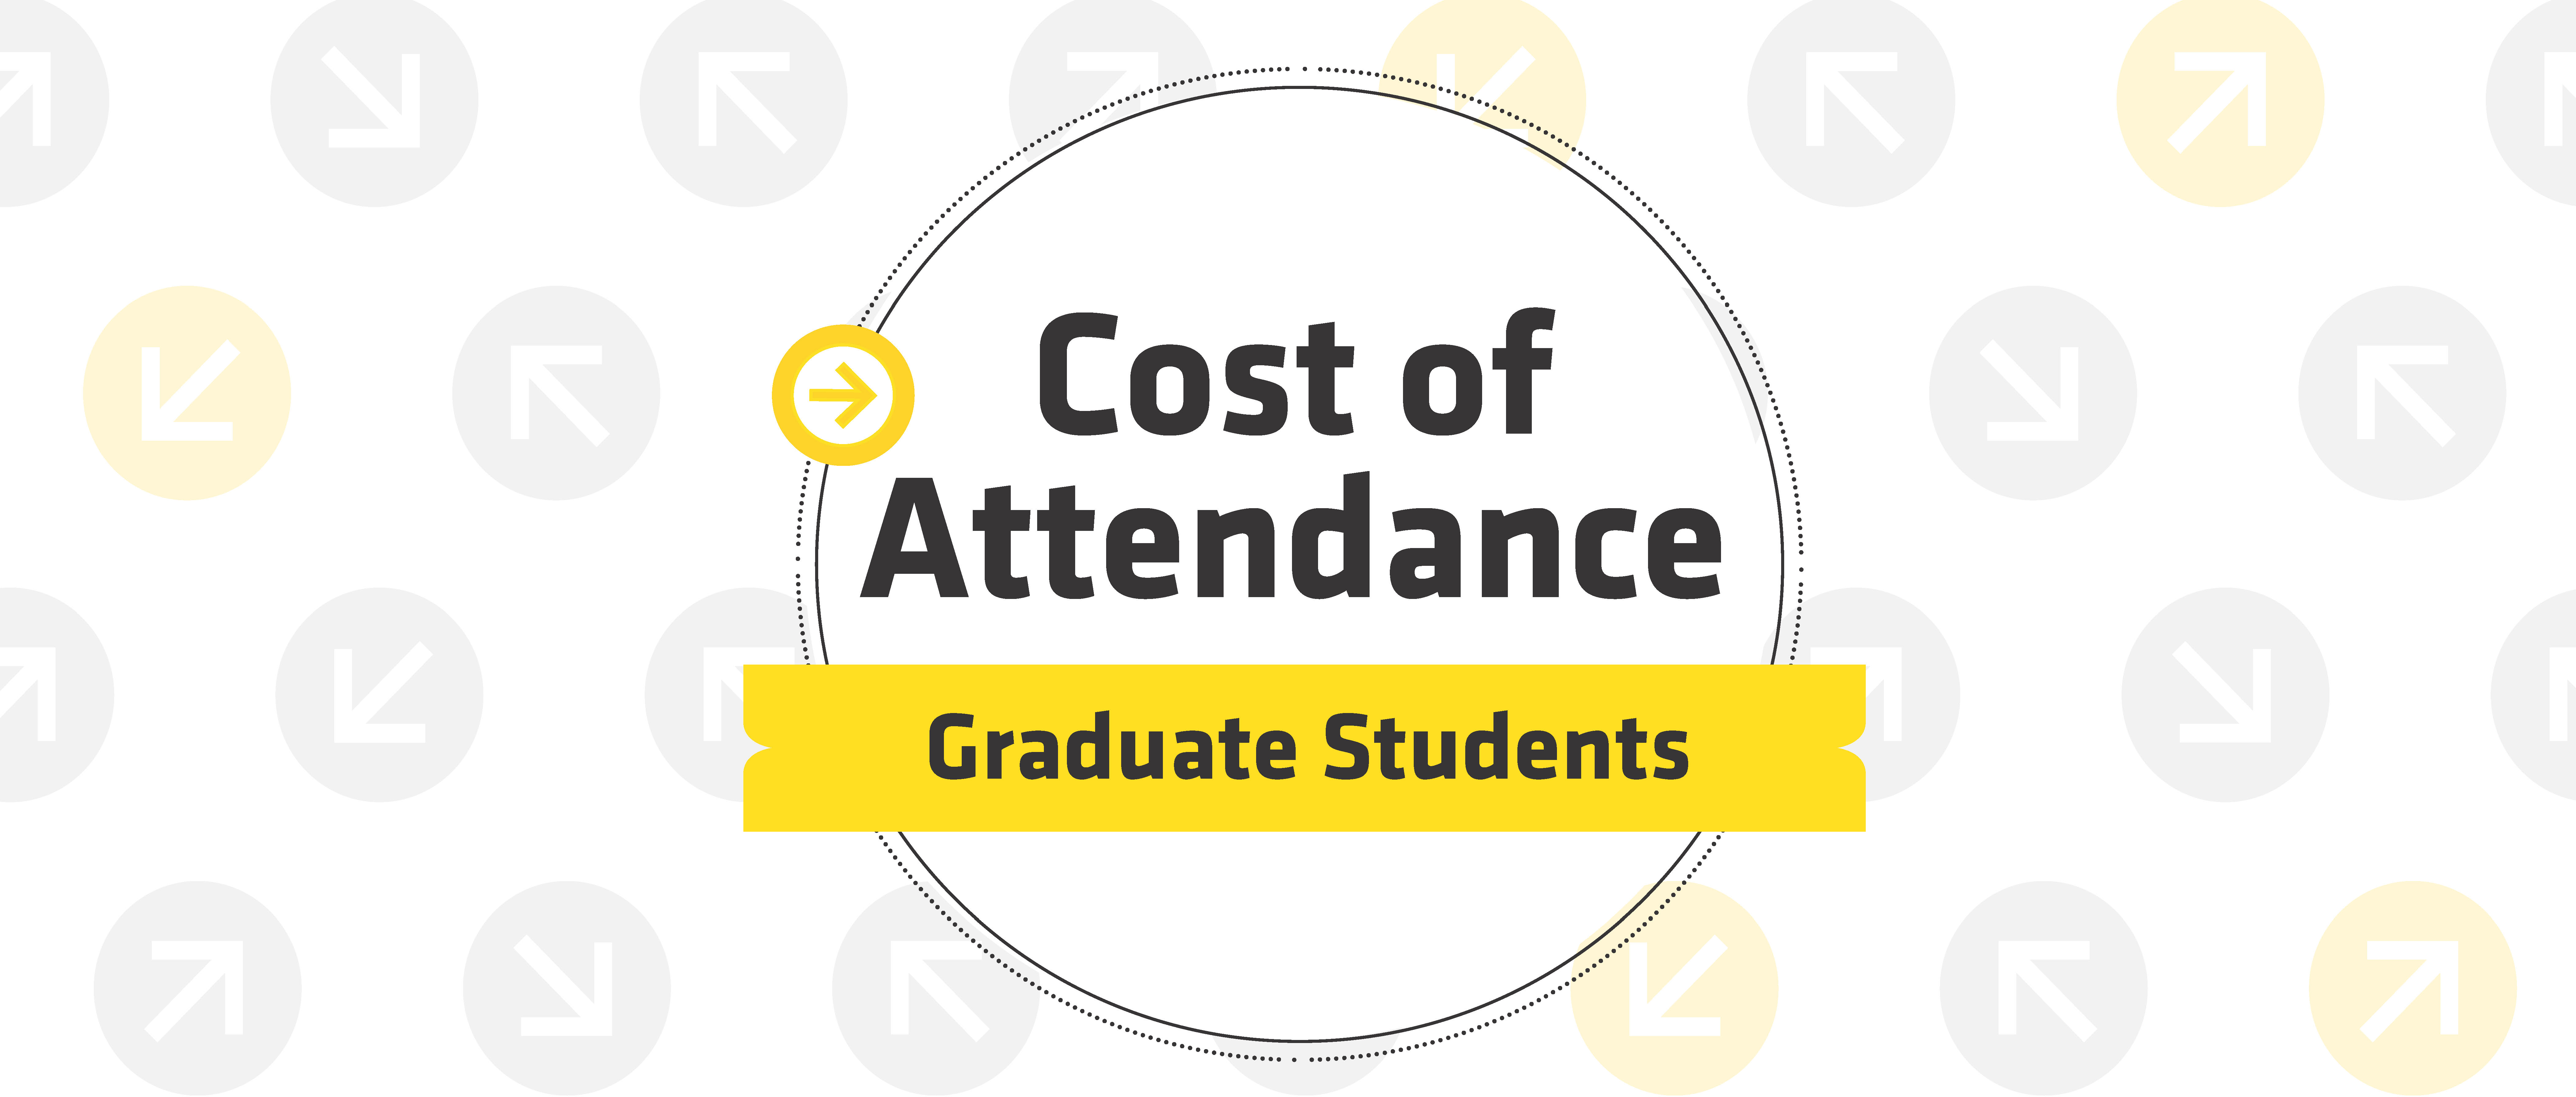 Cost of Attendance Graduate Students with circles and arrows